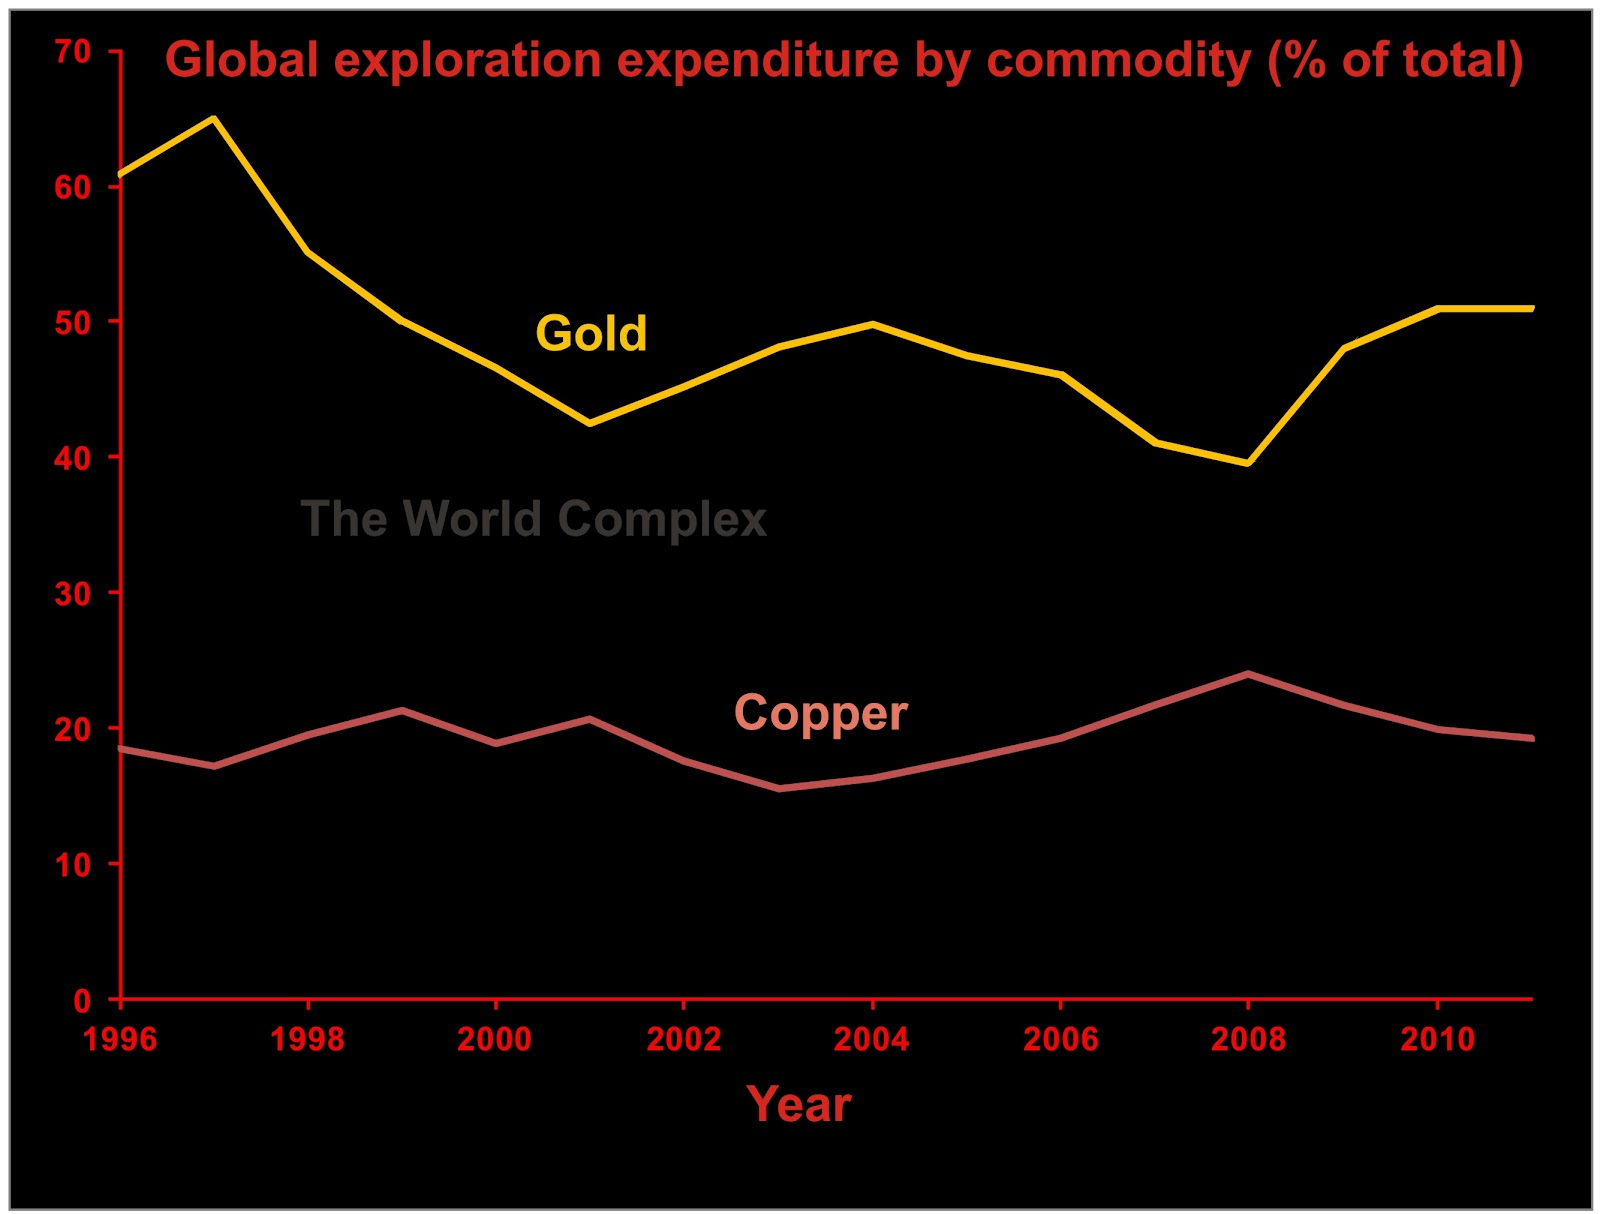 The World Complex: Reflections on market and commodity risks